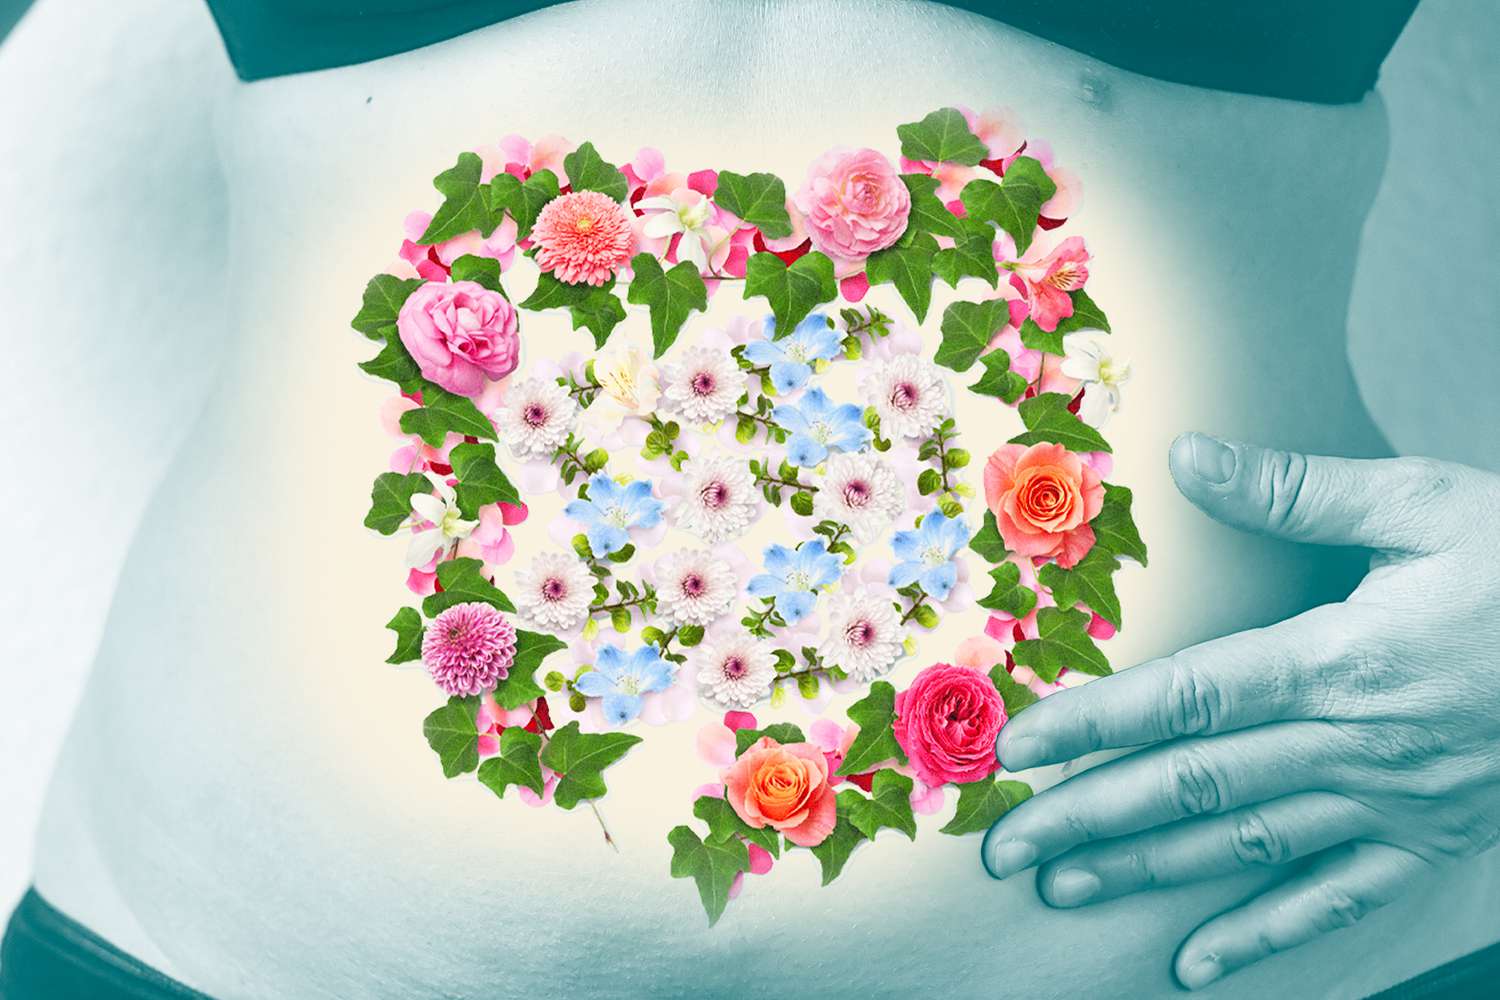 A woman's mid section with a cut out exposing flowers in the shape of intestines